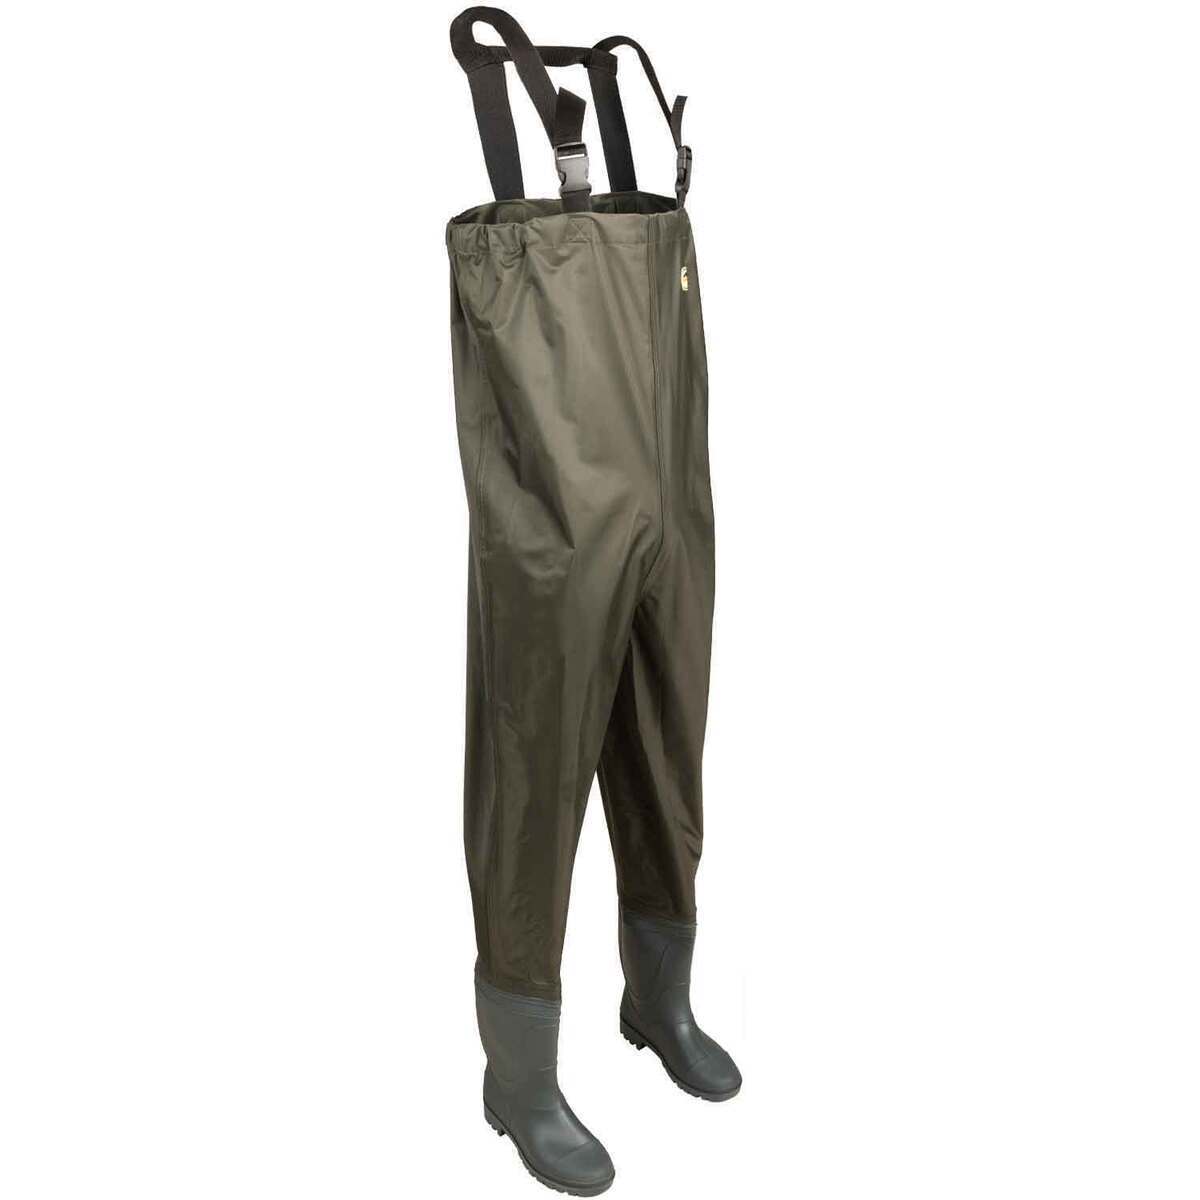  Waist Wader Pants Fishing Waders for Men Women with Boots  Waterproof Bootfoot Insulated Wading Pants Waders for Outdoors Hunting Duck  (Black, 8) : Sports & Outdoors